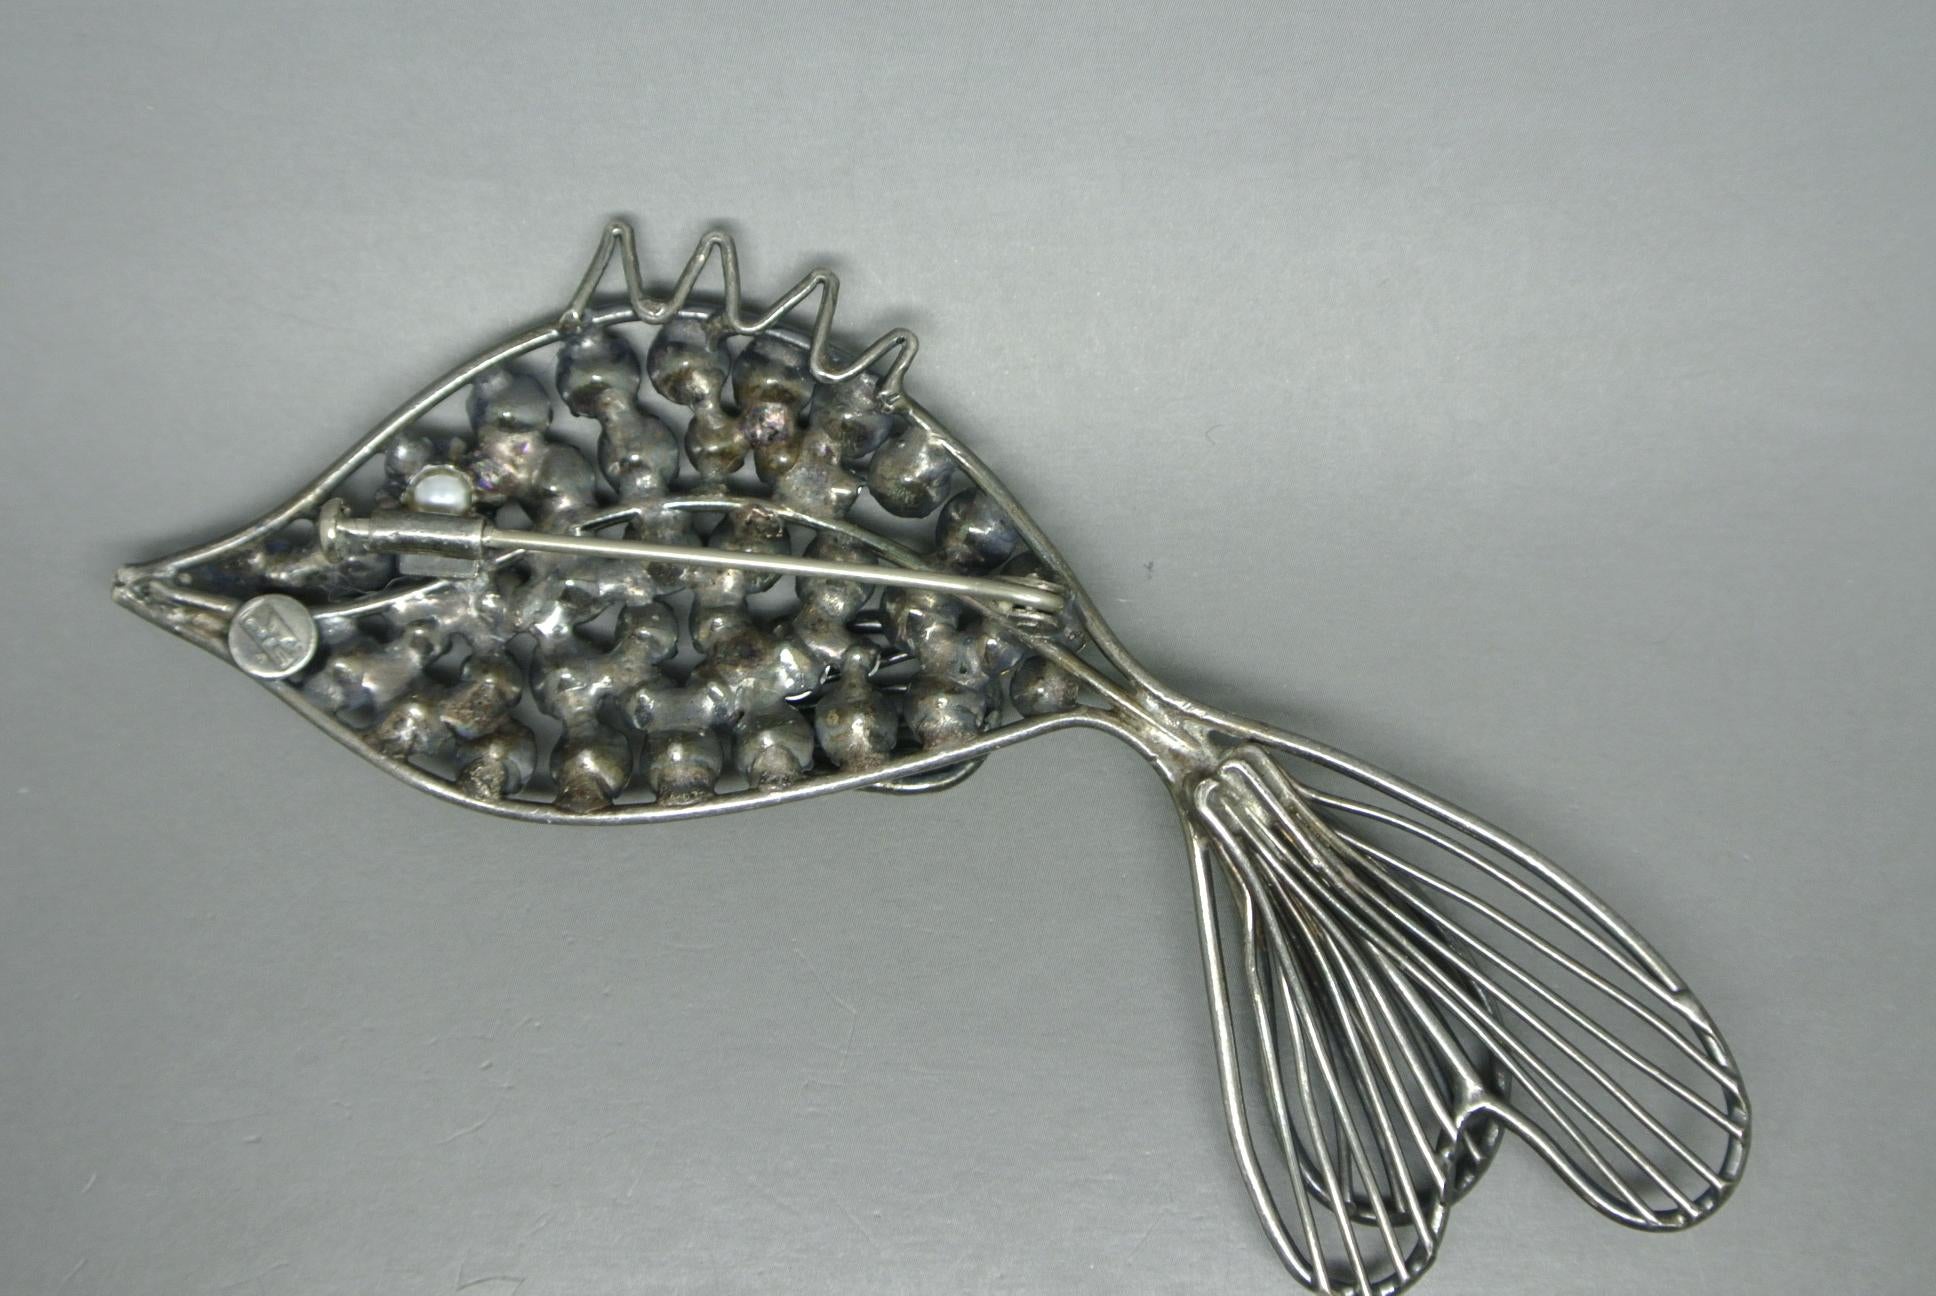 French Designer Cis Countess Fish Brooch
very rare design 
Signed Cis 
Small soldering mark can be seen on fish tail. 